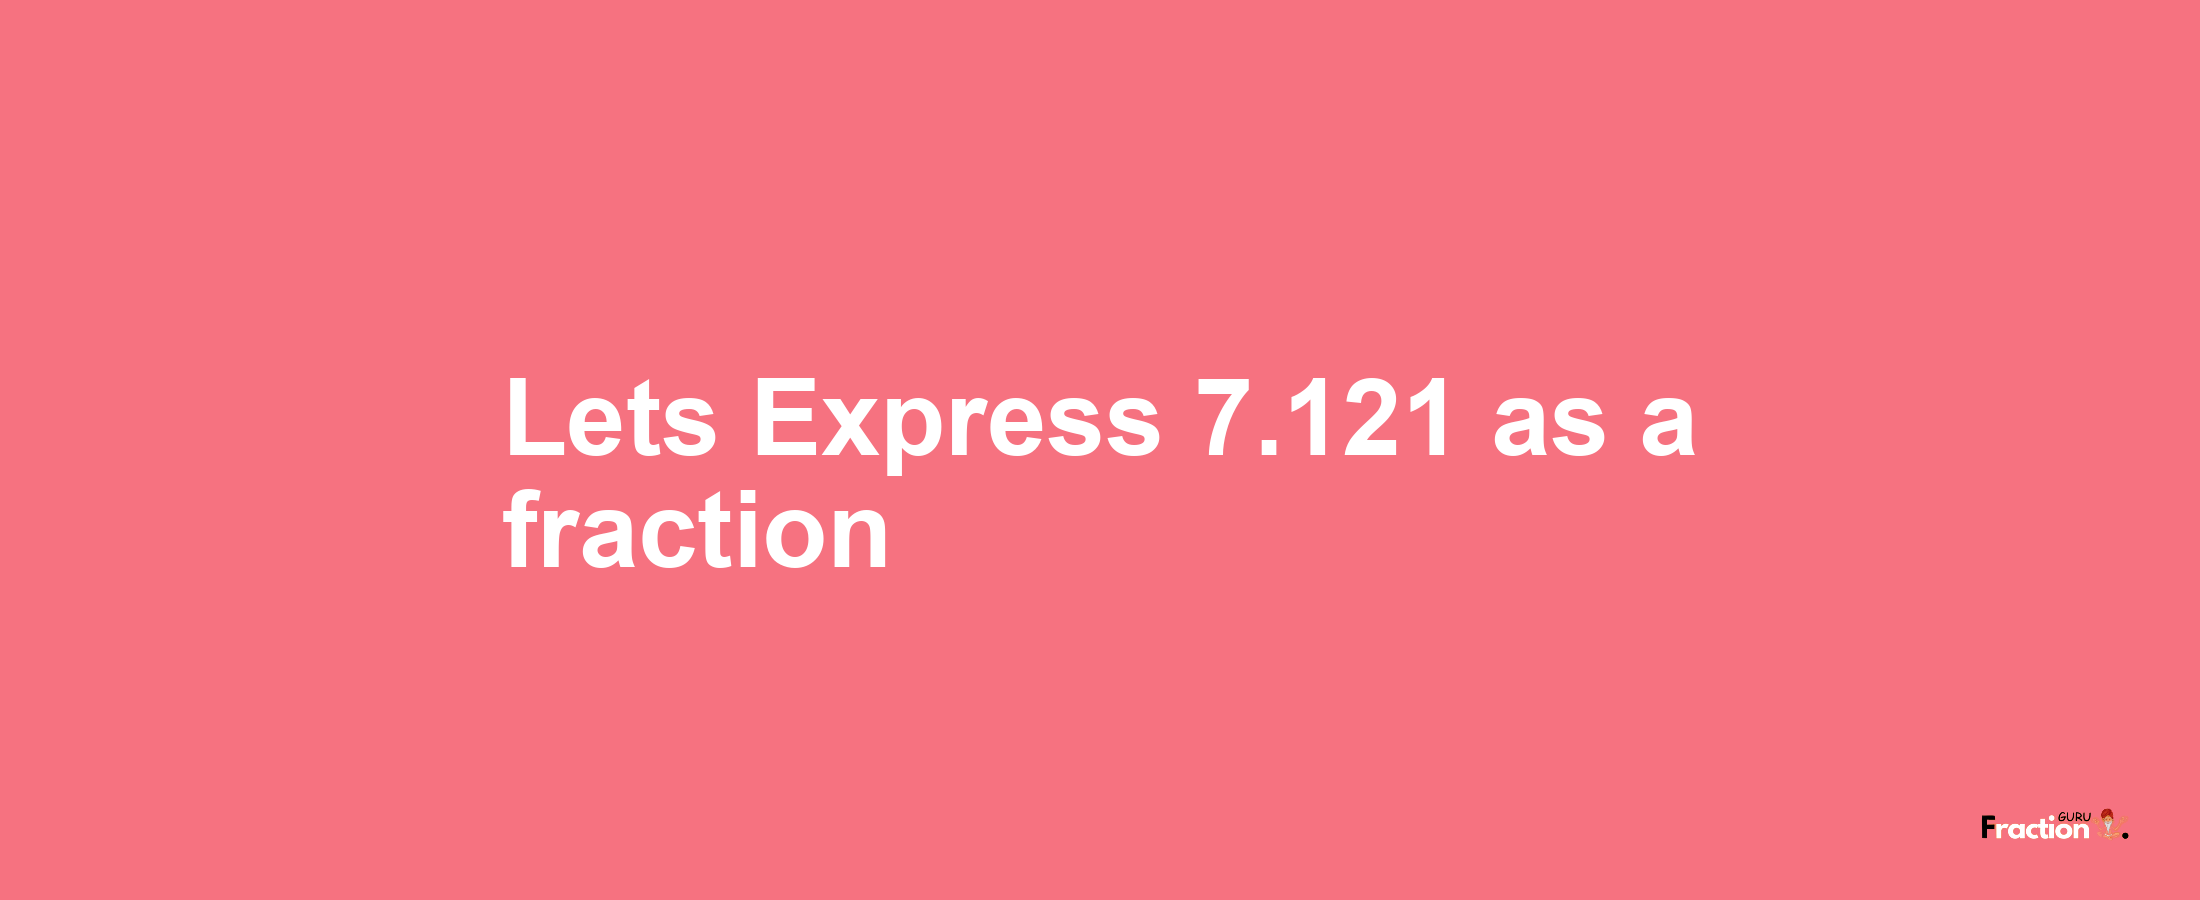 Lets Express 7.121 as afraction